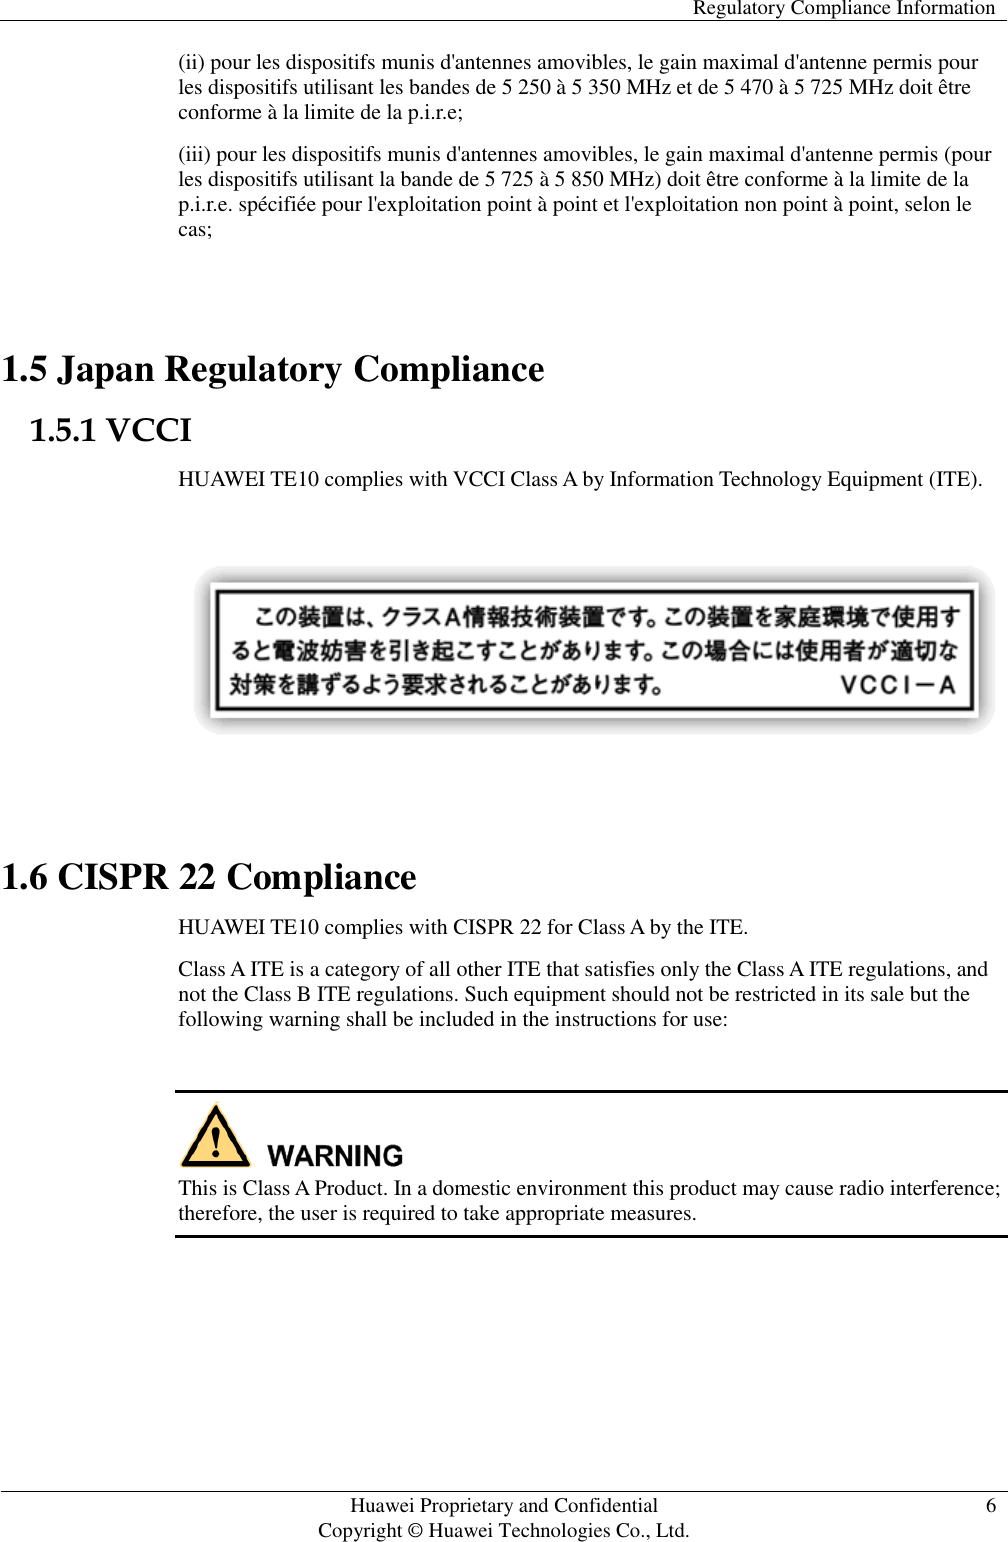   Regulatory Compliance Information   Huawei Proprietary and Confidential                                     Copyright © Huawei Technologies Co., Ltd. 6  (ii) pour les dispositifs munis d&apos;antennes amovibles, le gain maximal d&apos;antenne permis pour les dispositifs utilisant les bandes de 5 250 à 5 350 MHz et de 5 470 à 5 725 MHz doit être conforme à la limite de la p.i.r.e; (iii) pour les dispositifs munis d&apos;antennes amovibles, le gain maximal d&apos;antenne permis (pour les dispositifs utilisant la bande de 5 725 à 5 850 MHz) doit être conforme à la limite de la p.i.r.e. spécifiée pour l&apos;exploitation point à point et l&apos;exploitation non point à point, selon le cas;  1.5 Japan Regulatory Compliance 1.5.1 VCCI HUAWEI TE10 complies with VCCI Class A by Information Technology Equipment (ITE).    1.6 CISPR 22 Compliance HUAWEI TE10 complies with CISPR 22 for Class A by the ITE. Class A ITE is a category of all other ITE that satisfies only the Class A ITE regulations, and not the Class B ITE regulations. Such equipment should not be restricted in its sale but the following warning shall be included in the instructions for use:   This is Class A Product. In a domestic environment this product may cause radio interference; therefore, the user is required to take appropriate measures.  